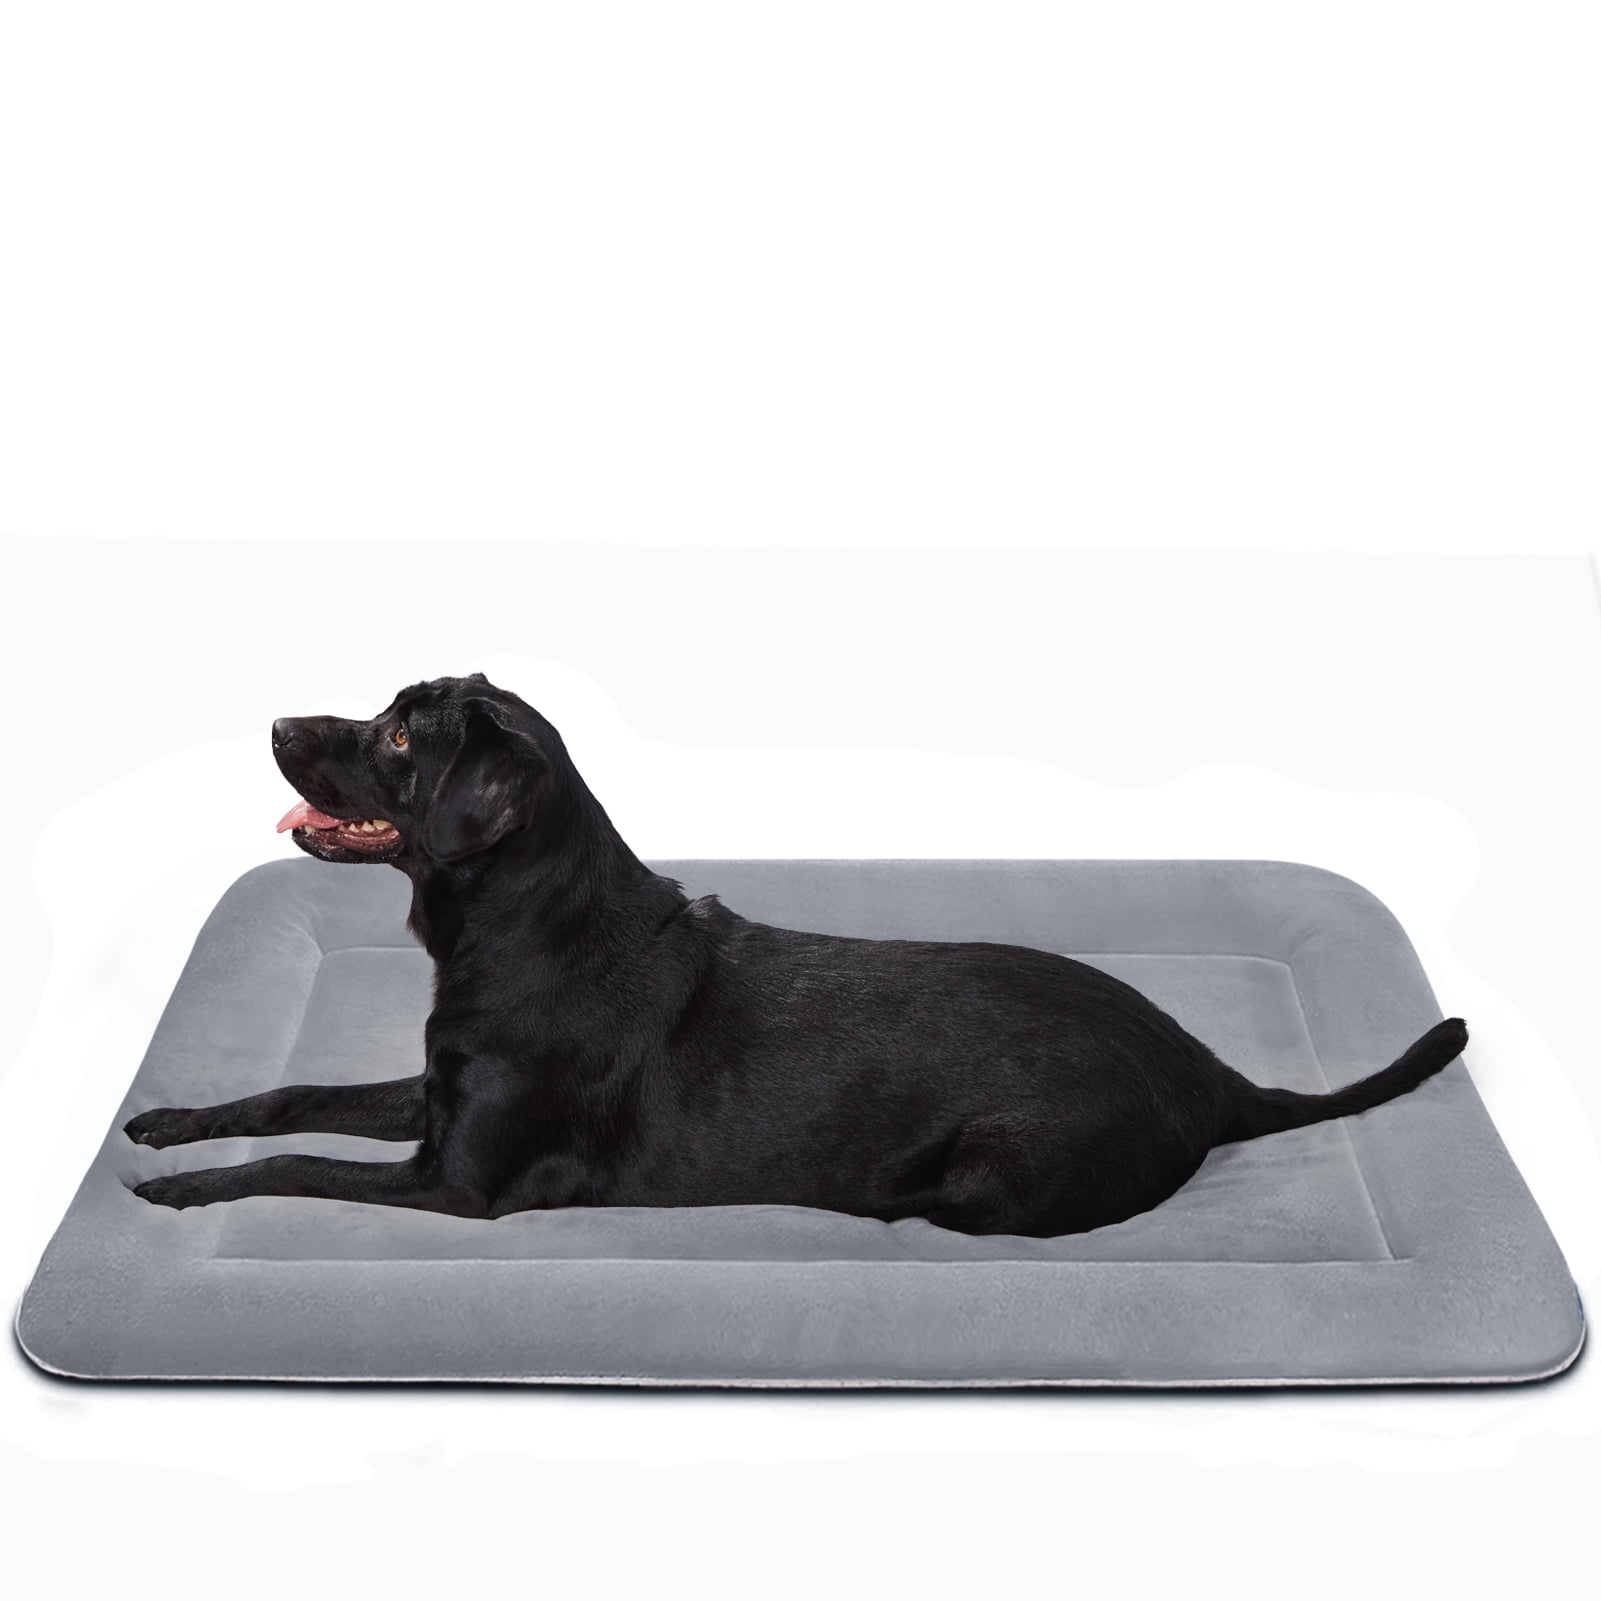 Durable & Water Resistant Crate Mat, (34 x 20) Dog Bed - Perfect